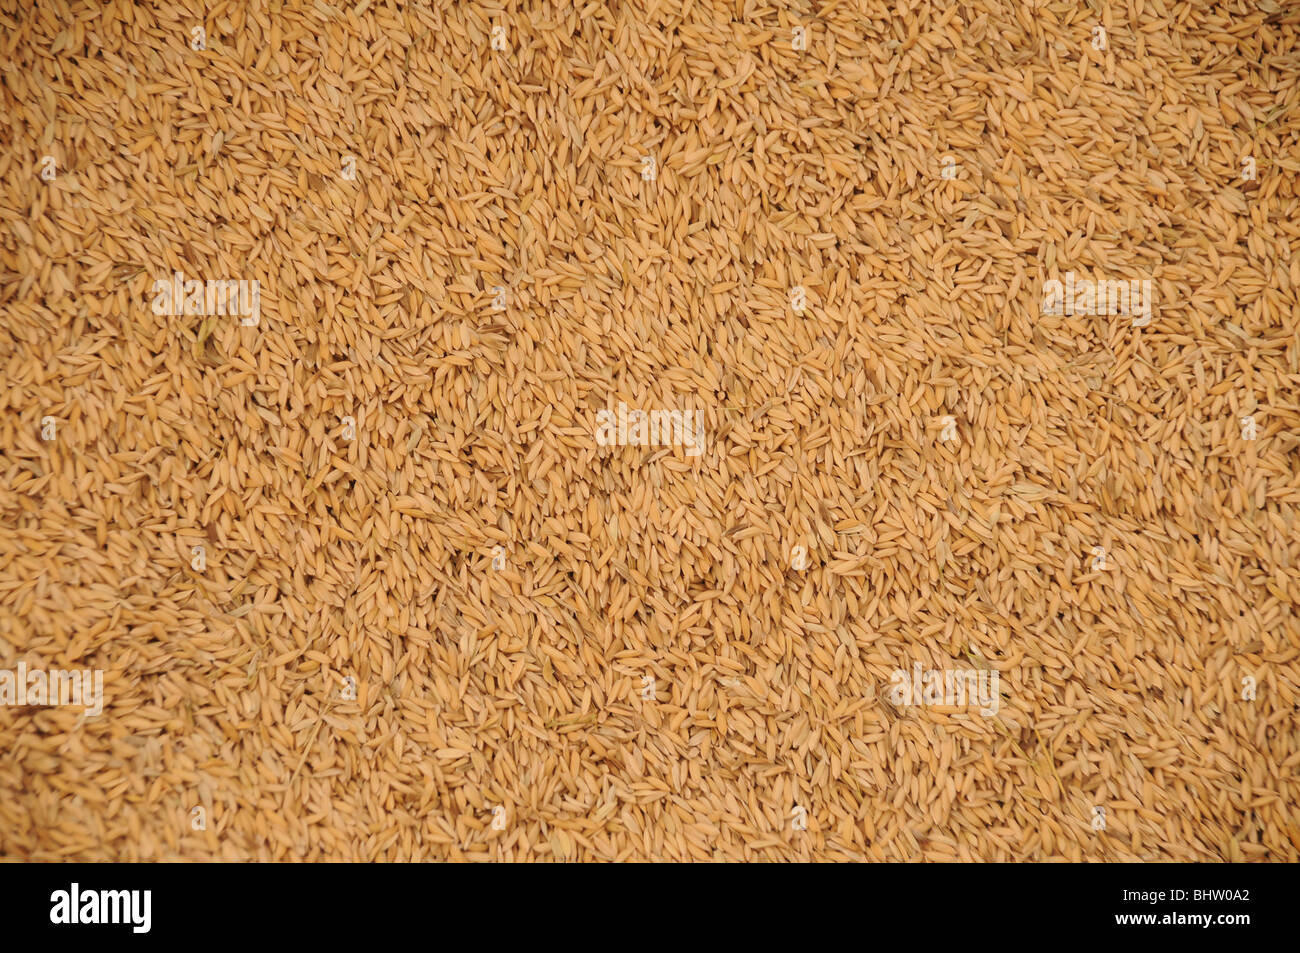 close up of harvested rice, ready for its husks to be removed Stock Photo